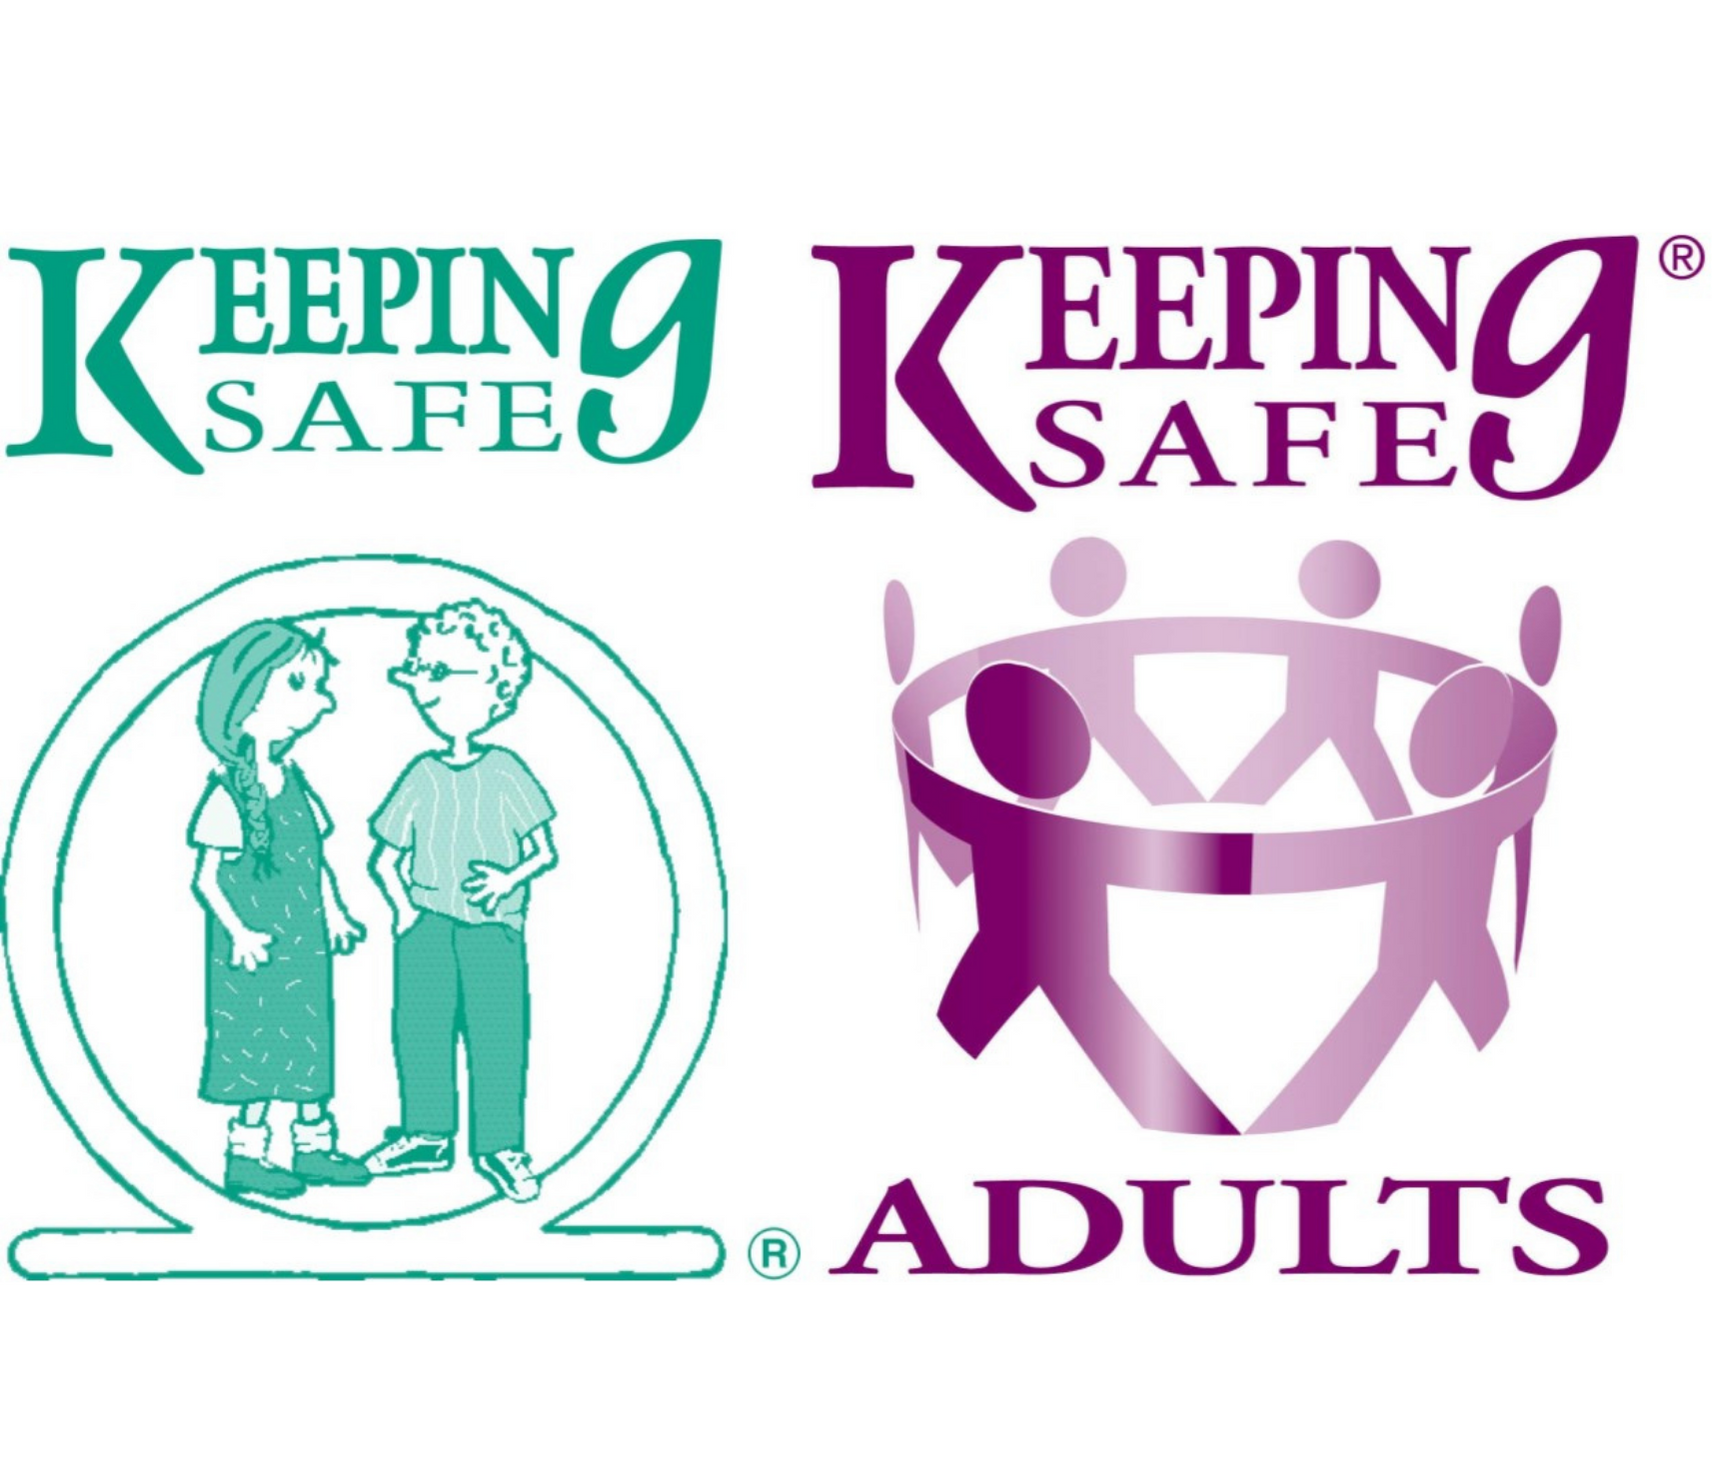 Keeping Children and Adults Safe: Training for Staff and Volunteers